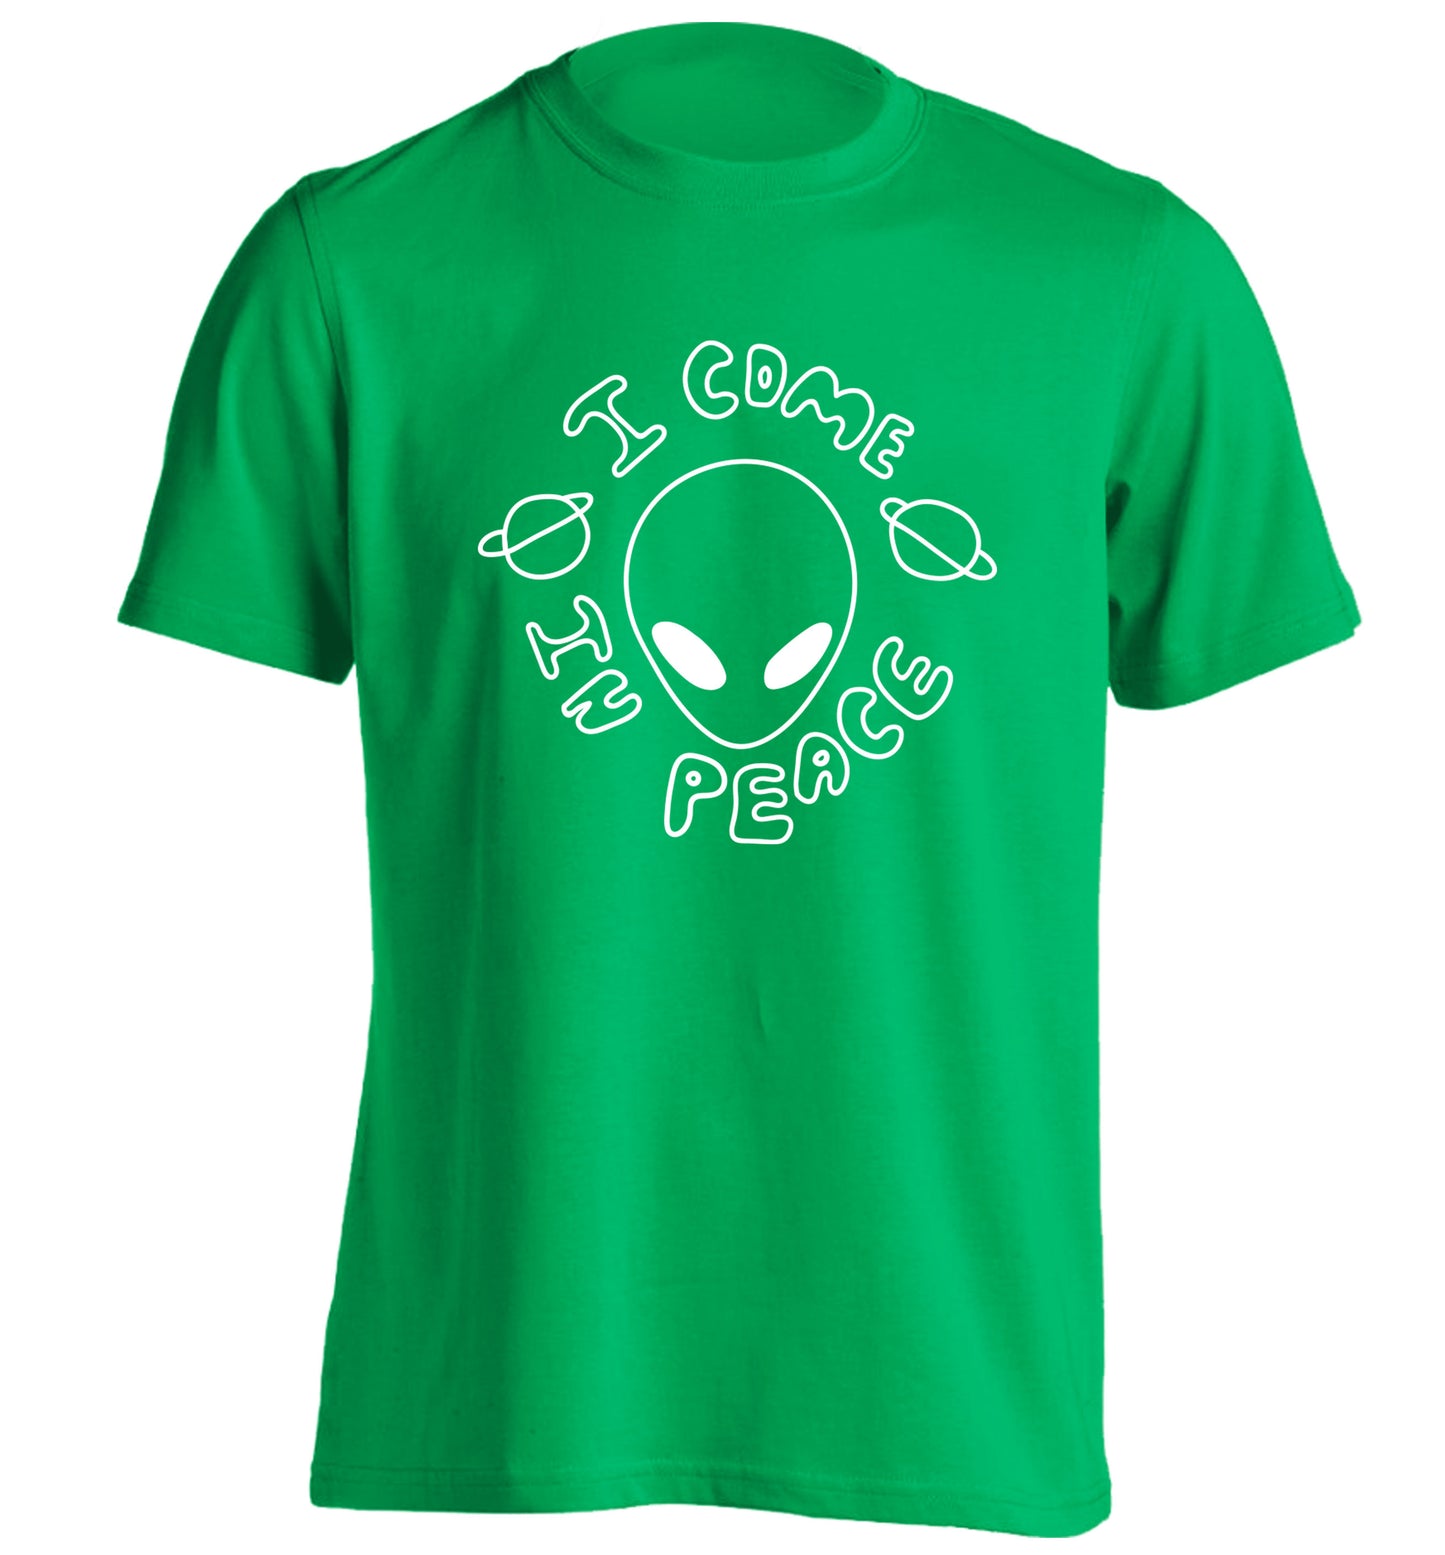 I come in peace adults unisex green Tshirt 2XL